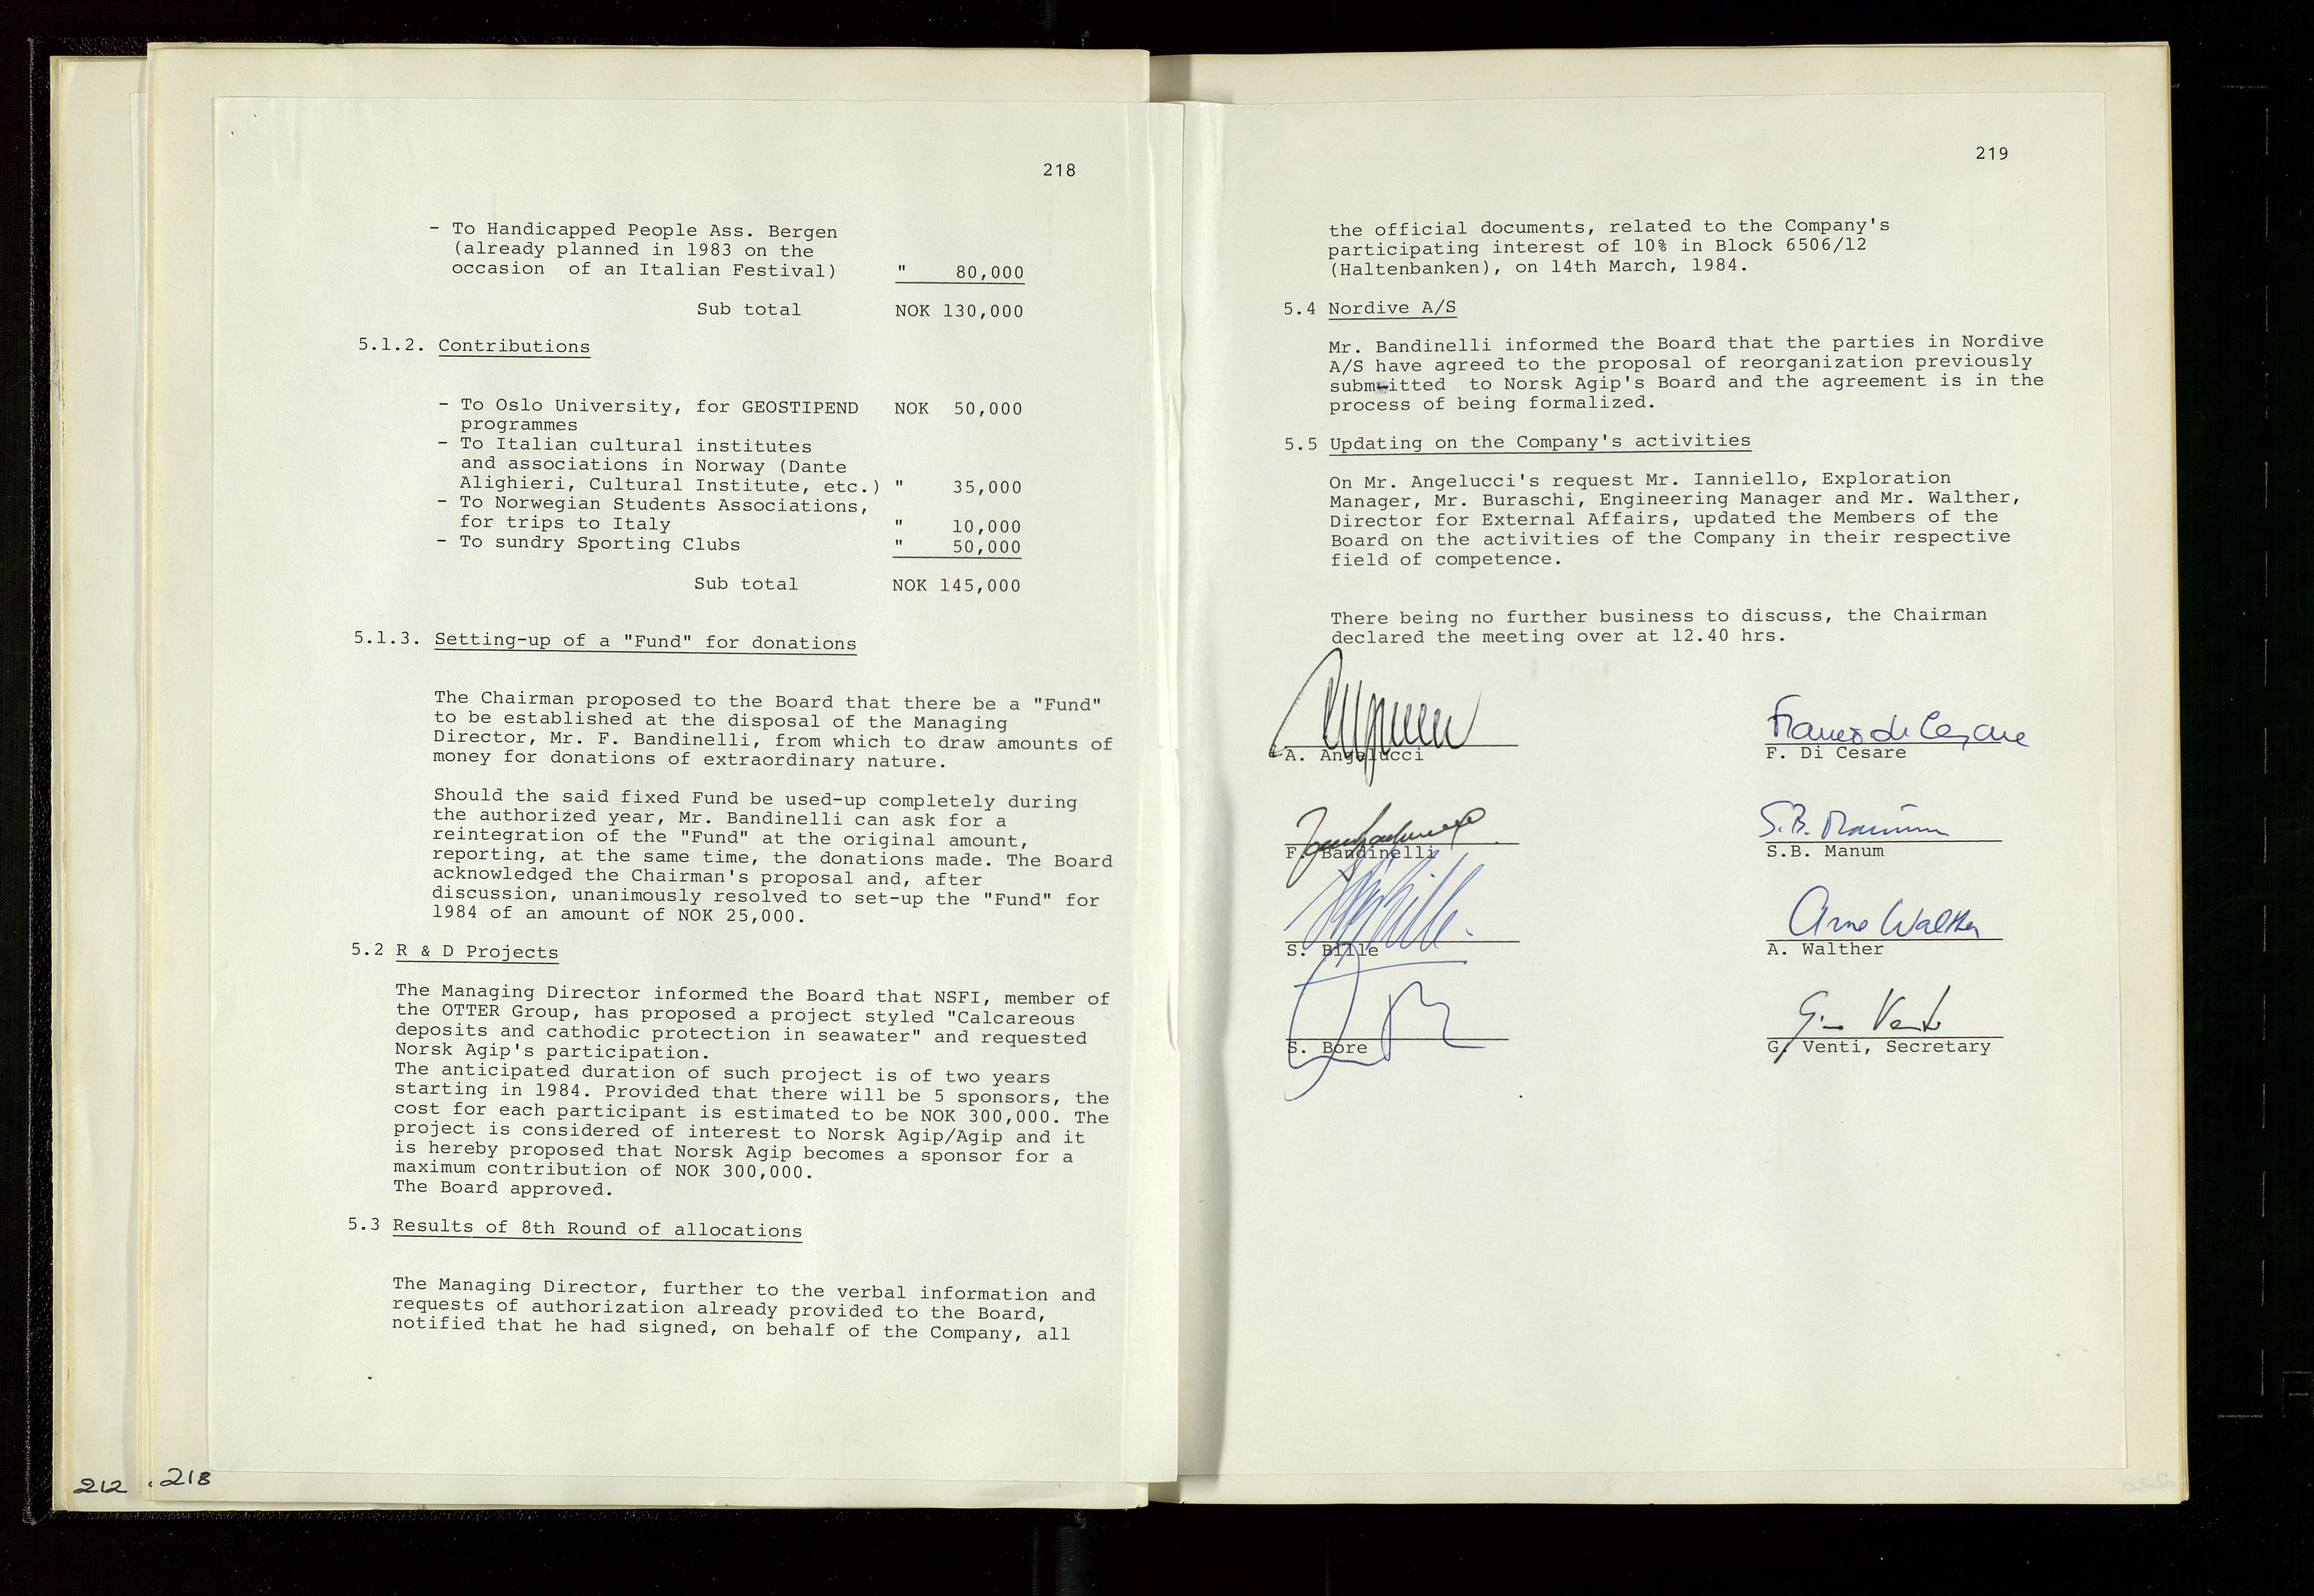 Pa 1583 - Norsk Agip AS, SAST/A-102138/A/Aa/L0003: Board of Directors meeting minutes, 1979-1983, s. 218-219